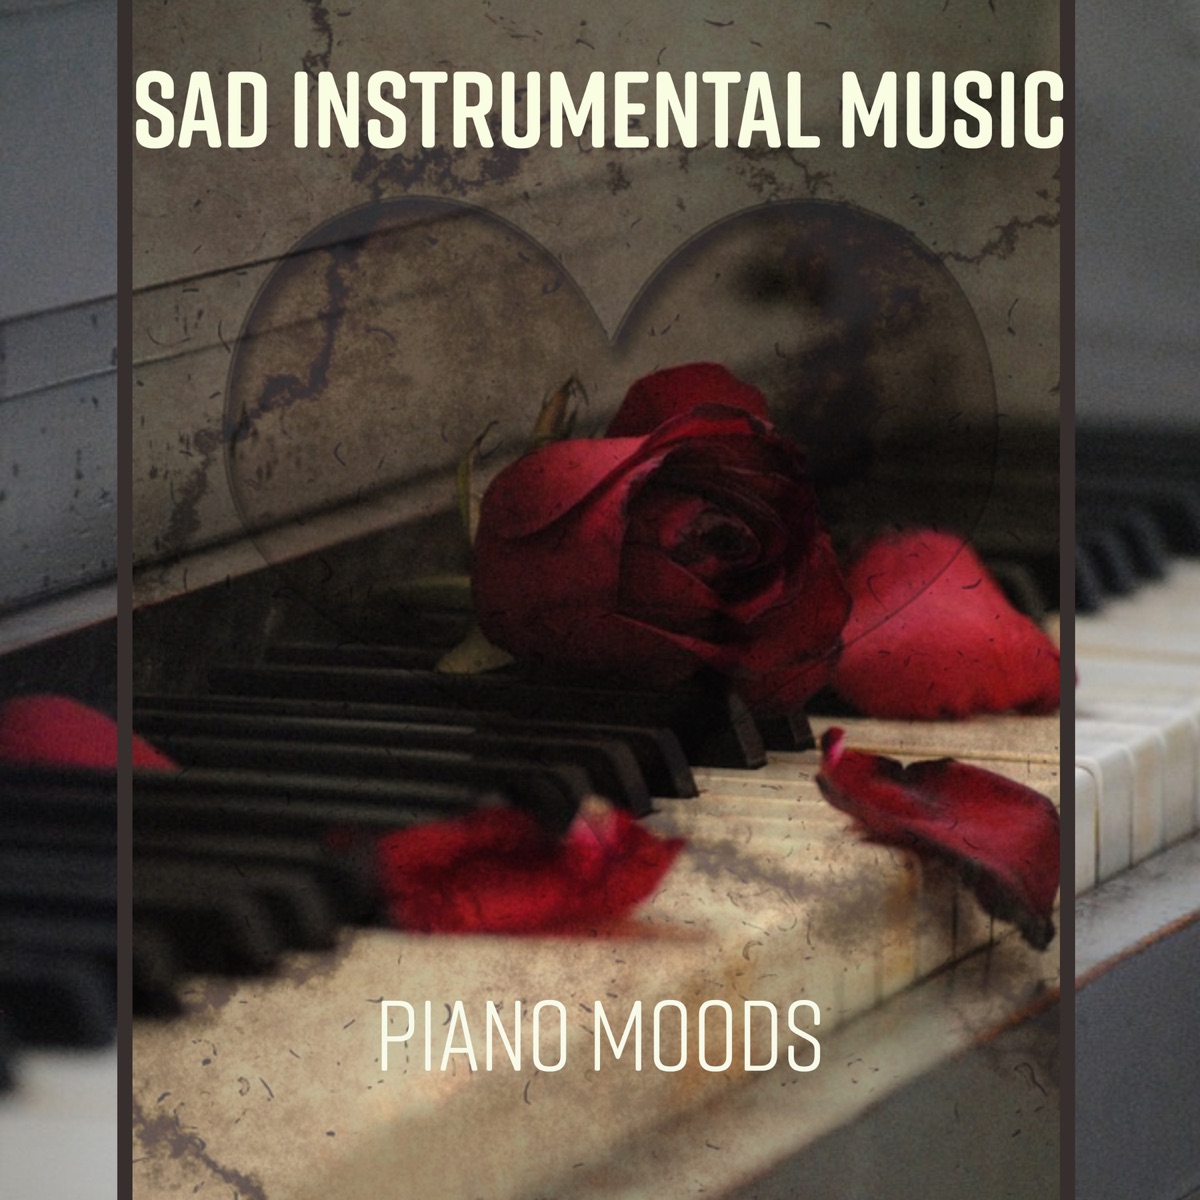 Sad Instrumental Music: Jazz Piano Moods, Sentimental Journey for Broken  Heart, Music That Will Make You Cry, Sad Love Songs for Melancholic Evening  with Glass of Wine, Sad Life & Sad Story